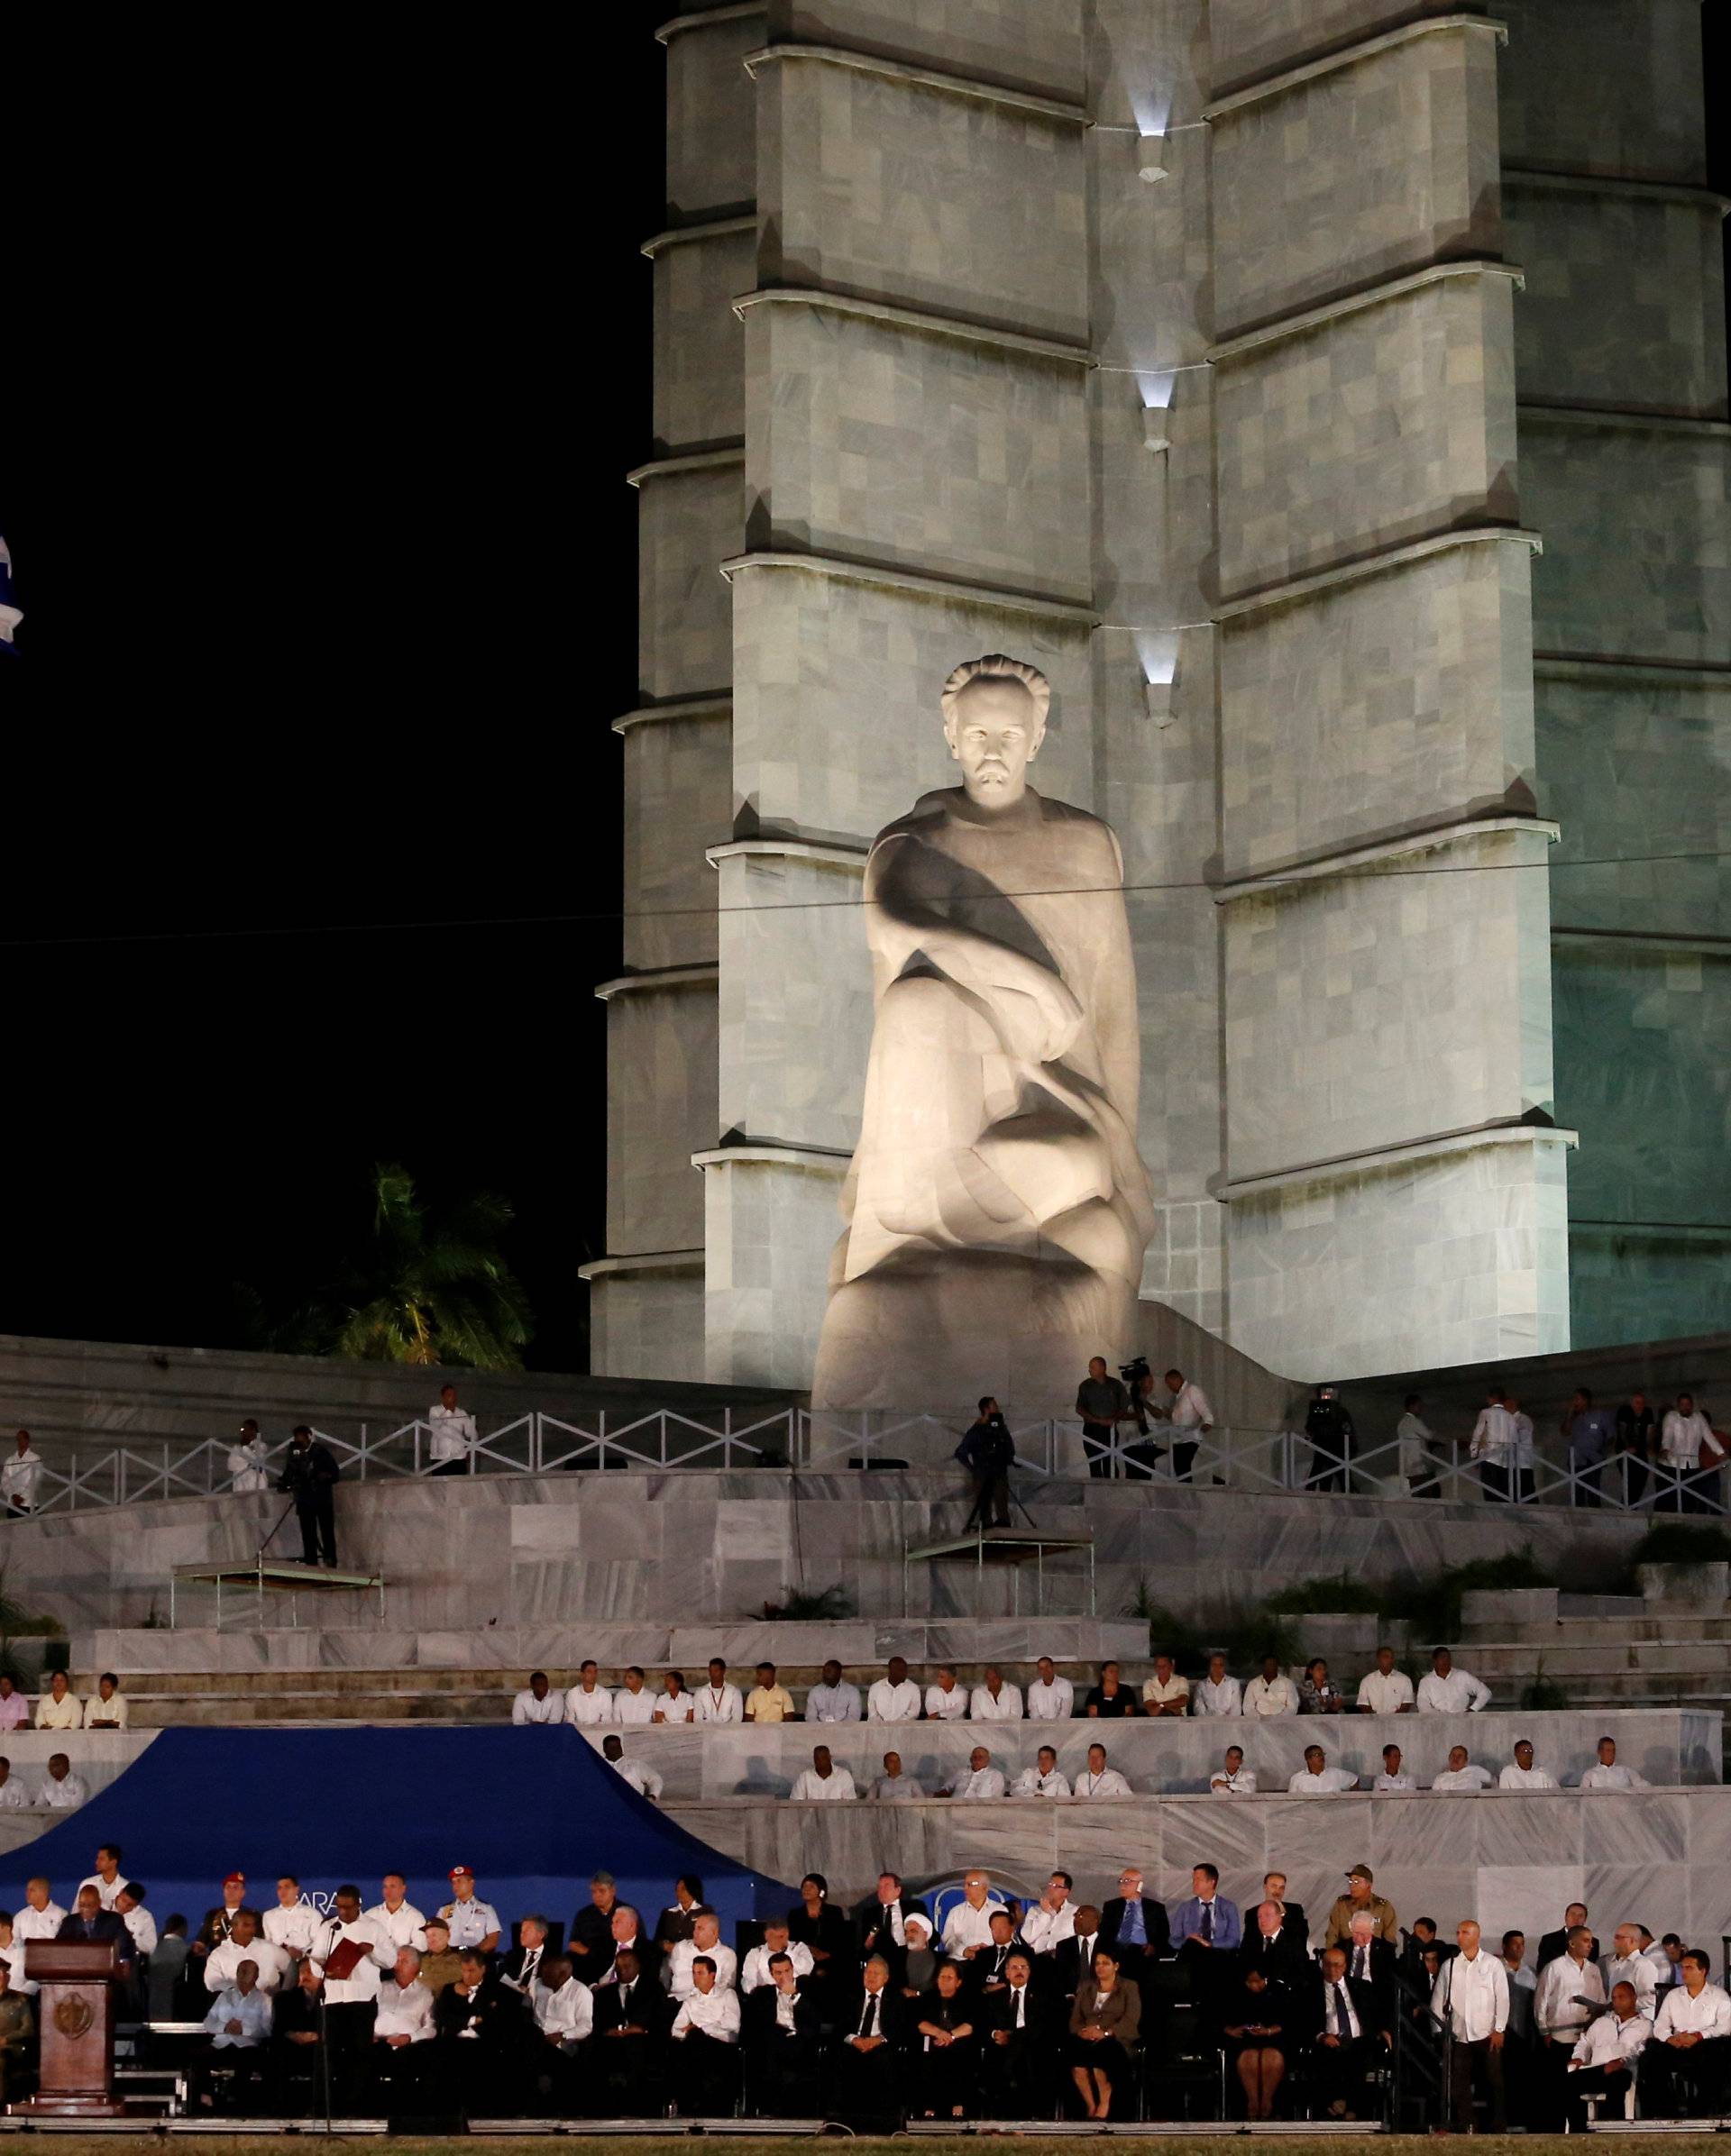 The Cuban flag flies at half-mast as dignitaries gather for a massive tribute to Cuba's late President Fidel Castro in Revolution Square in Havana